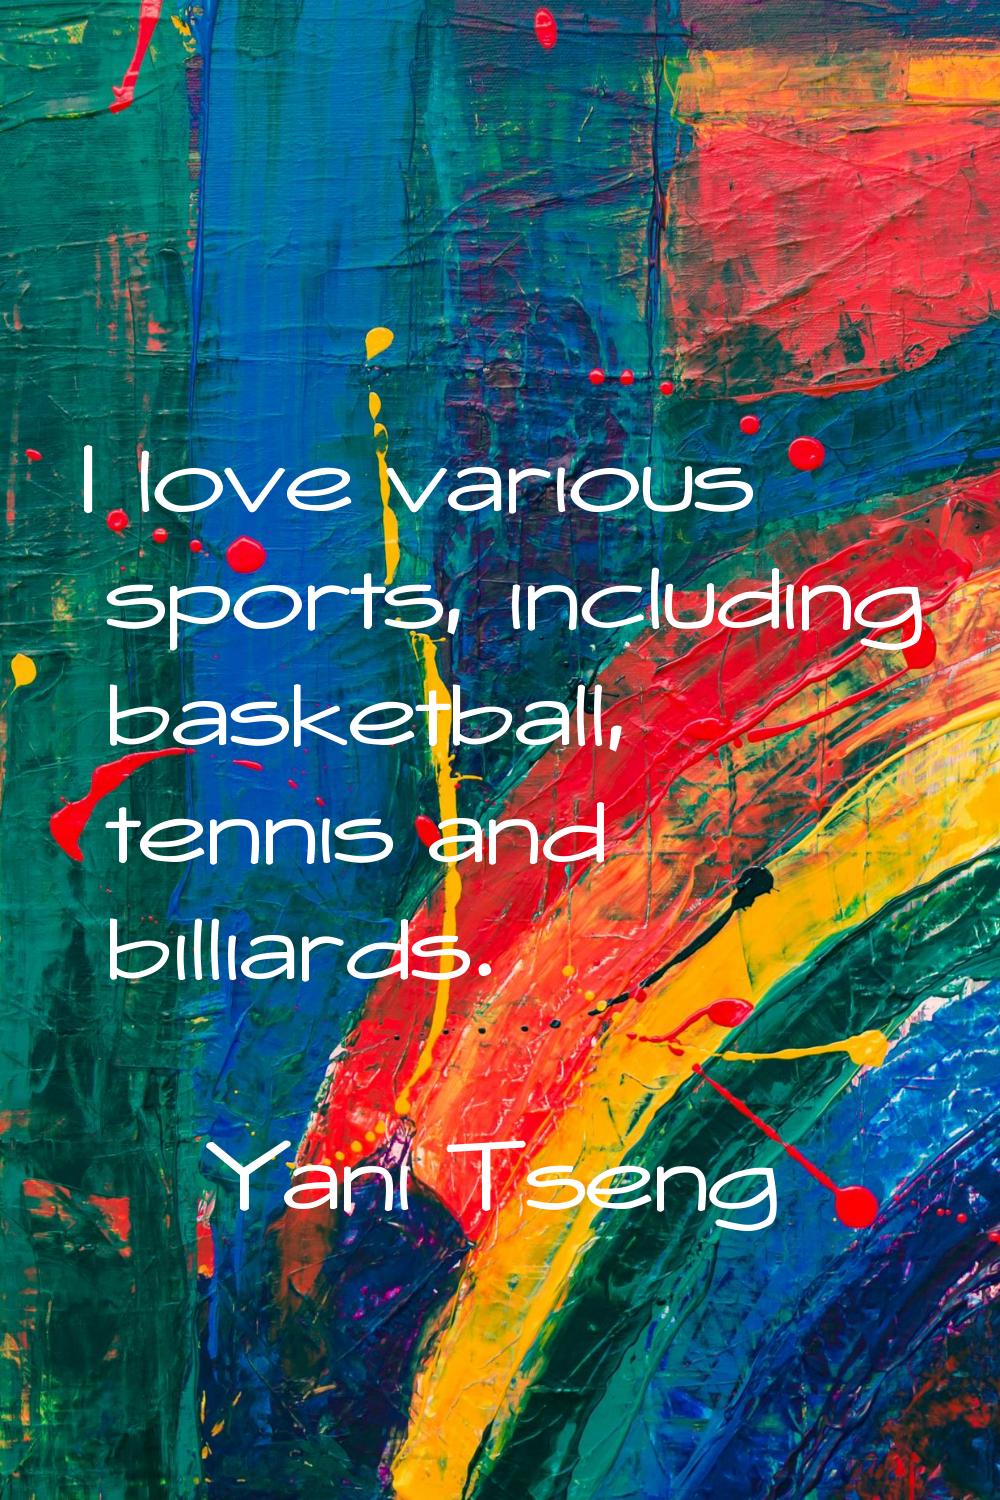 I love various sports, including basketball, tennis and billiards.